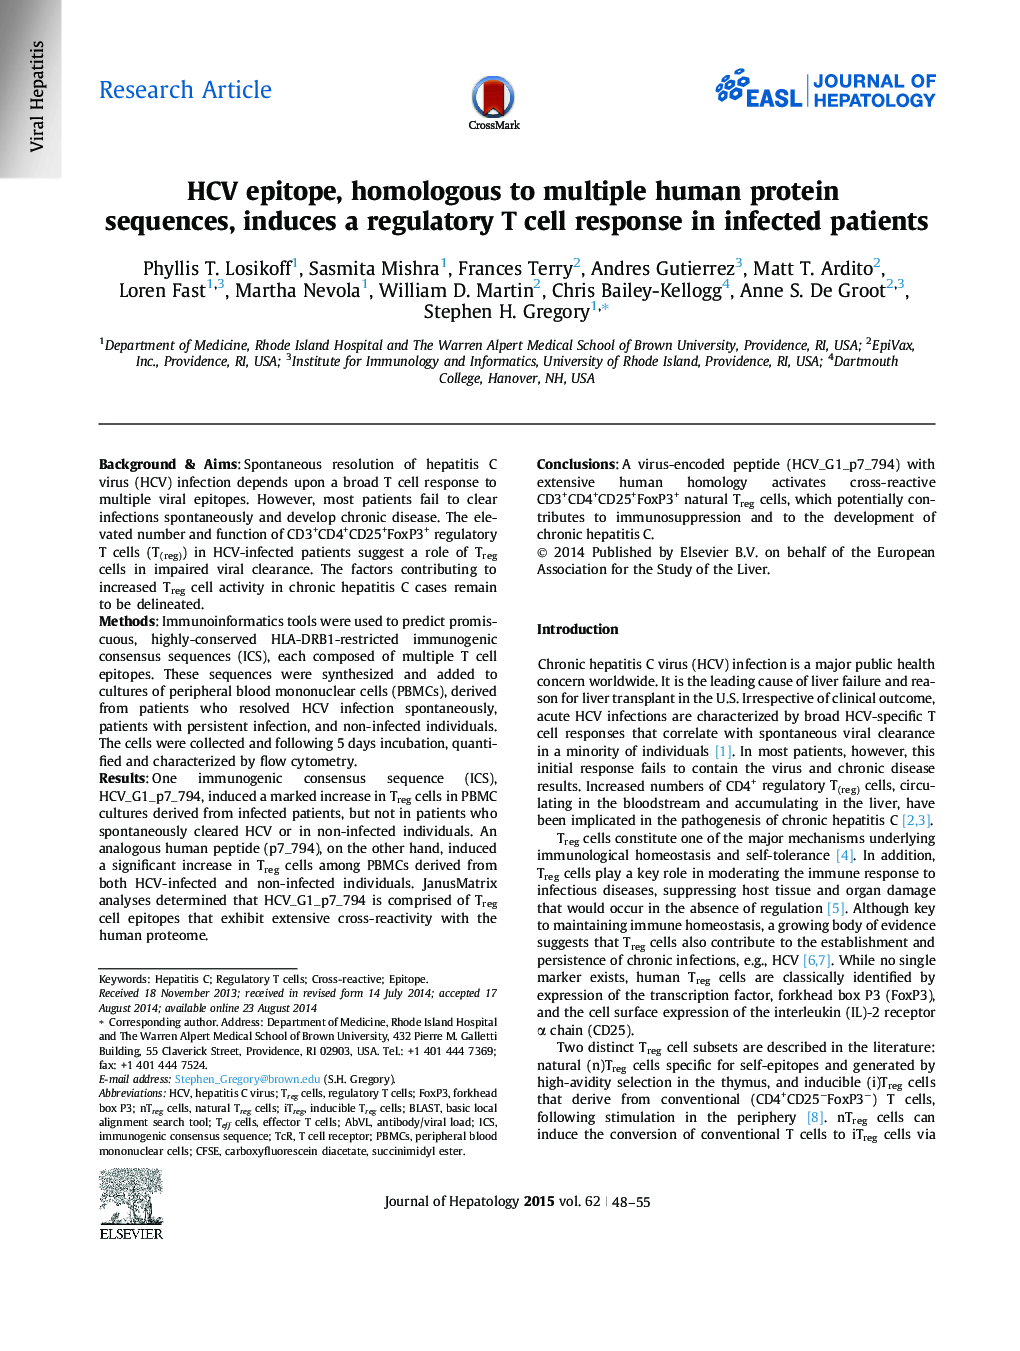 Research ArticleHCV epitope, homologous to multiple human protein sequences, induces a regulatory T cell response in infected patients